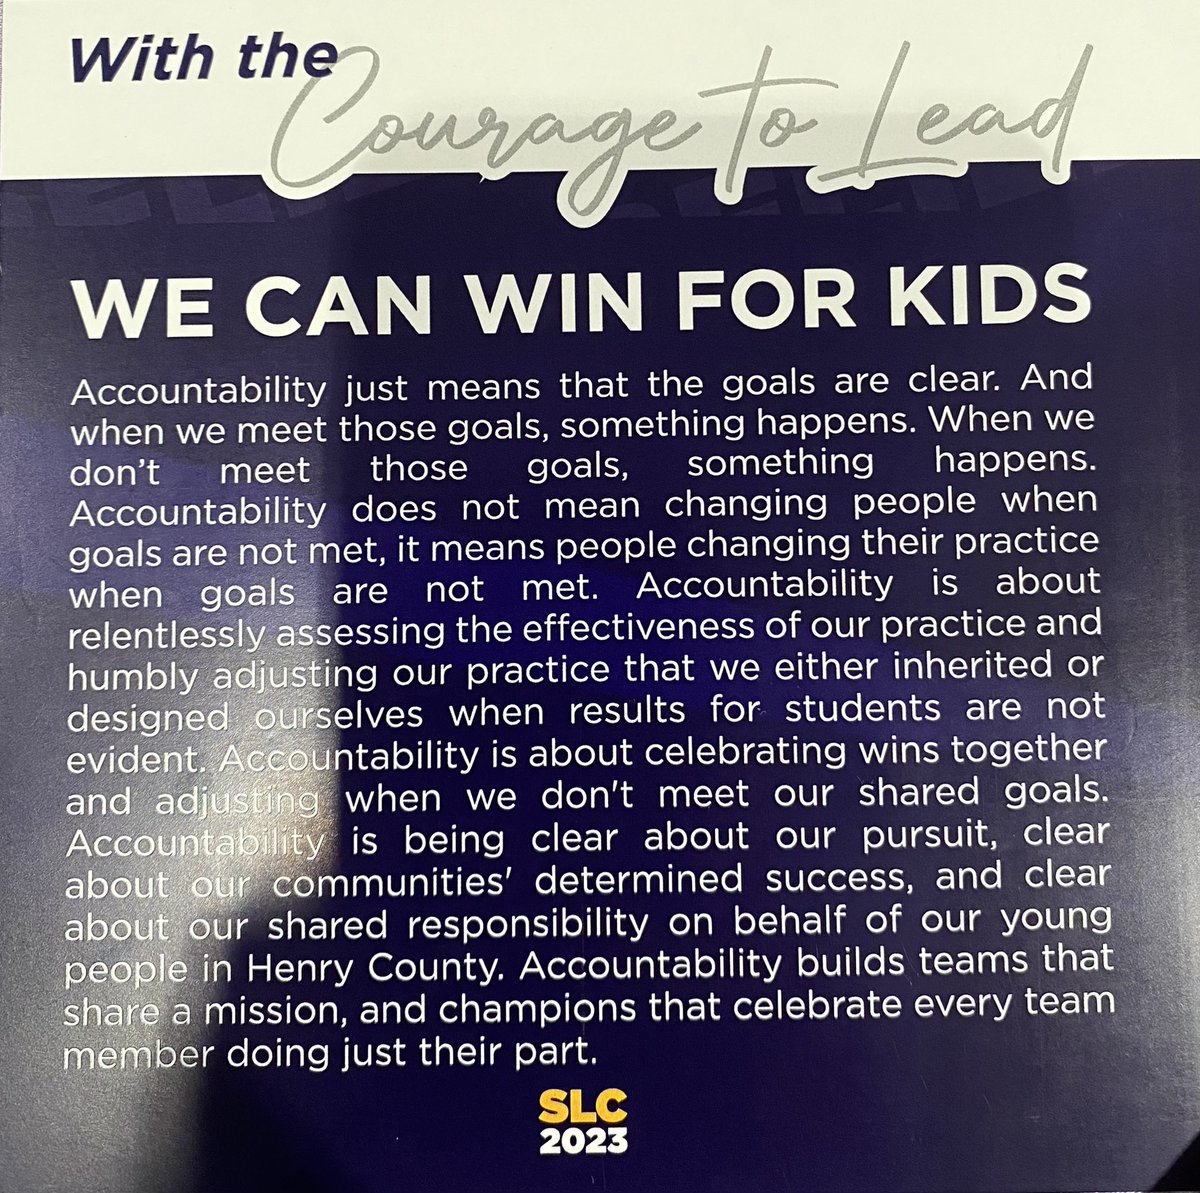 “Accountability does not mean changing people when goals are not met, it means people changing their practice when goals are not met.” #SLC2023 #CourageToLead #WinningEveryMinuteEveryDayForEveryKid